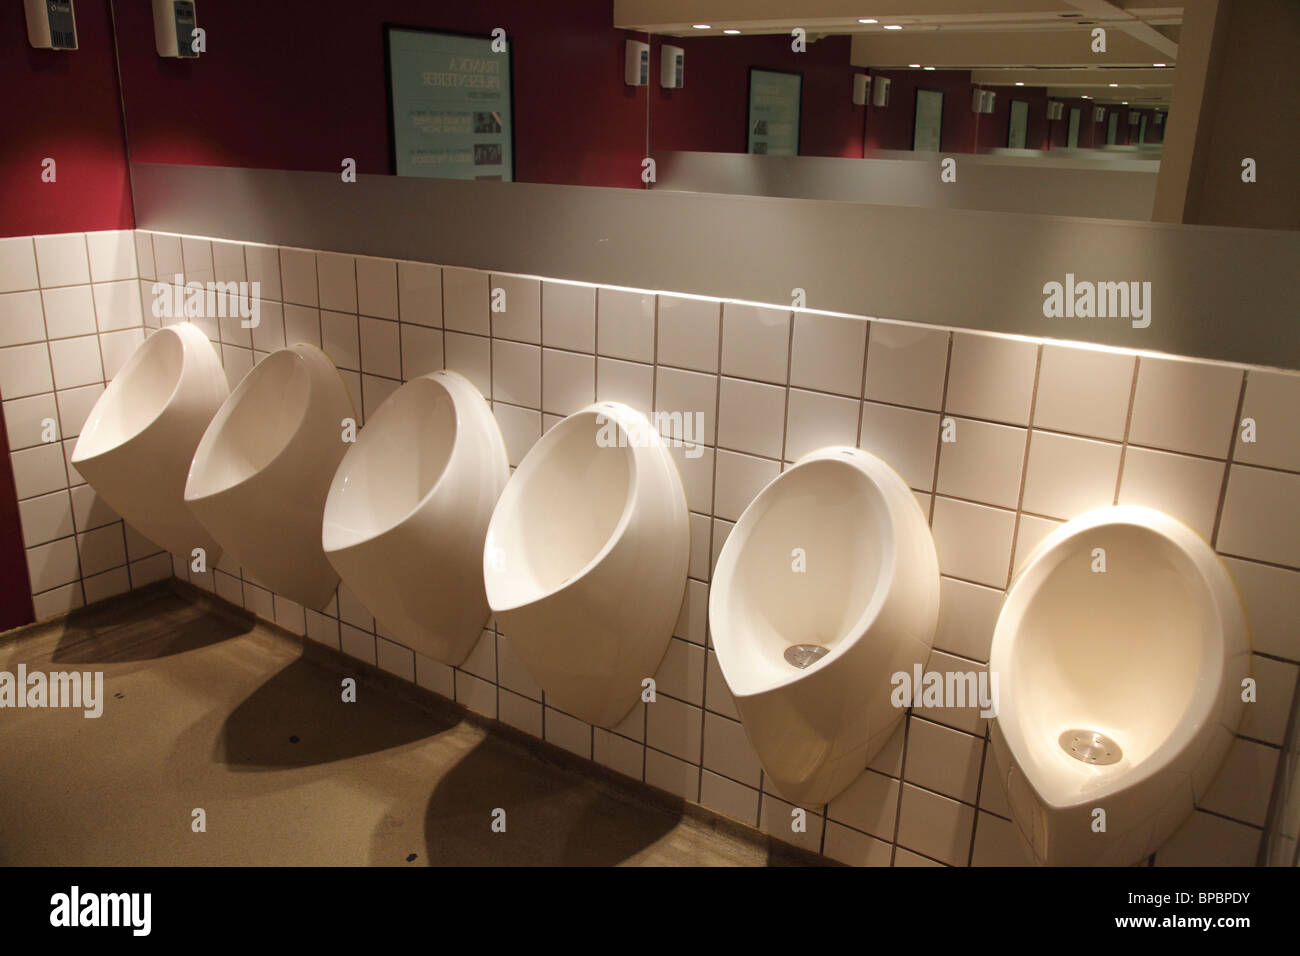 urinals in a public toilet Stock Photo